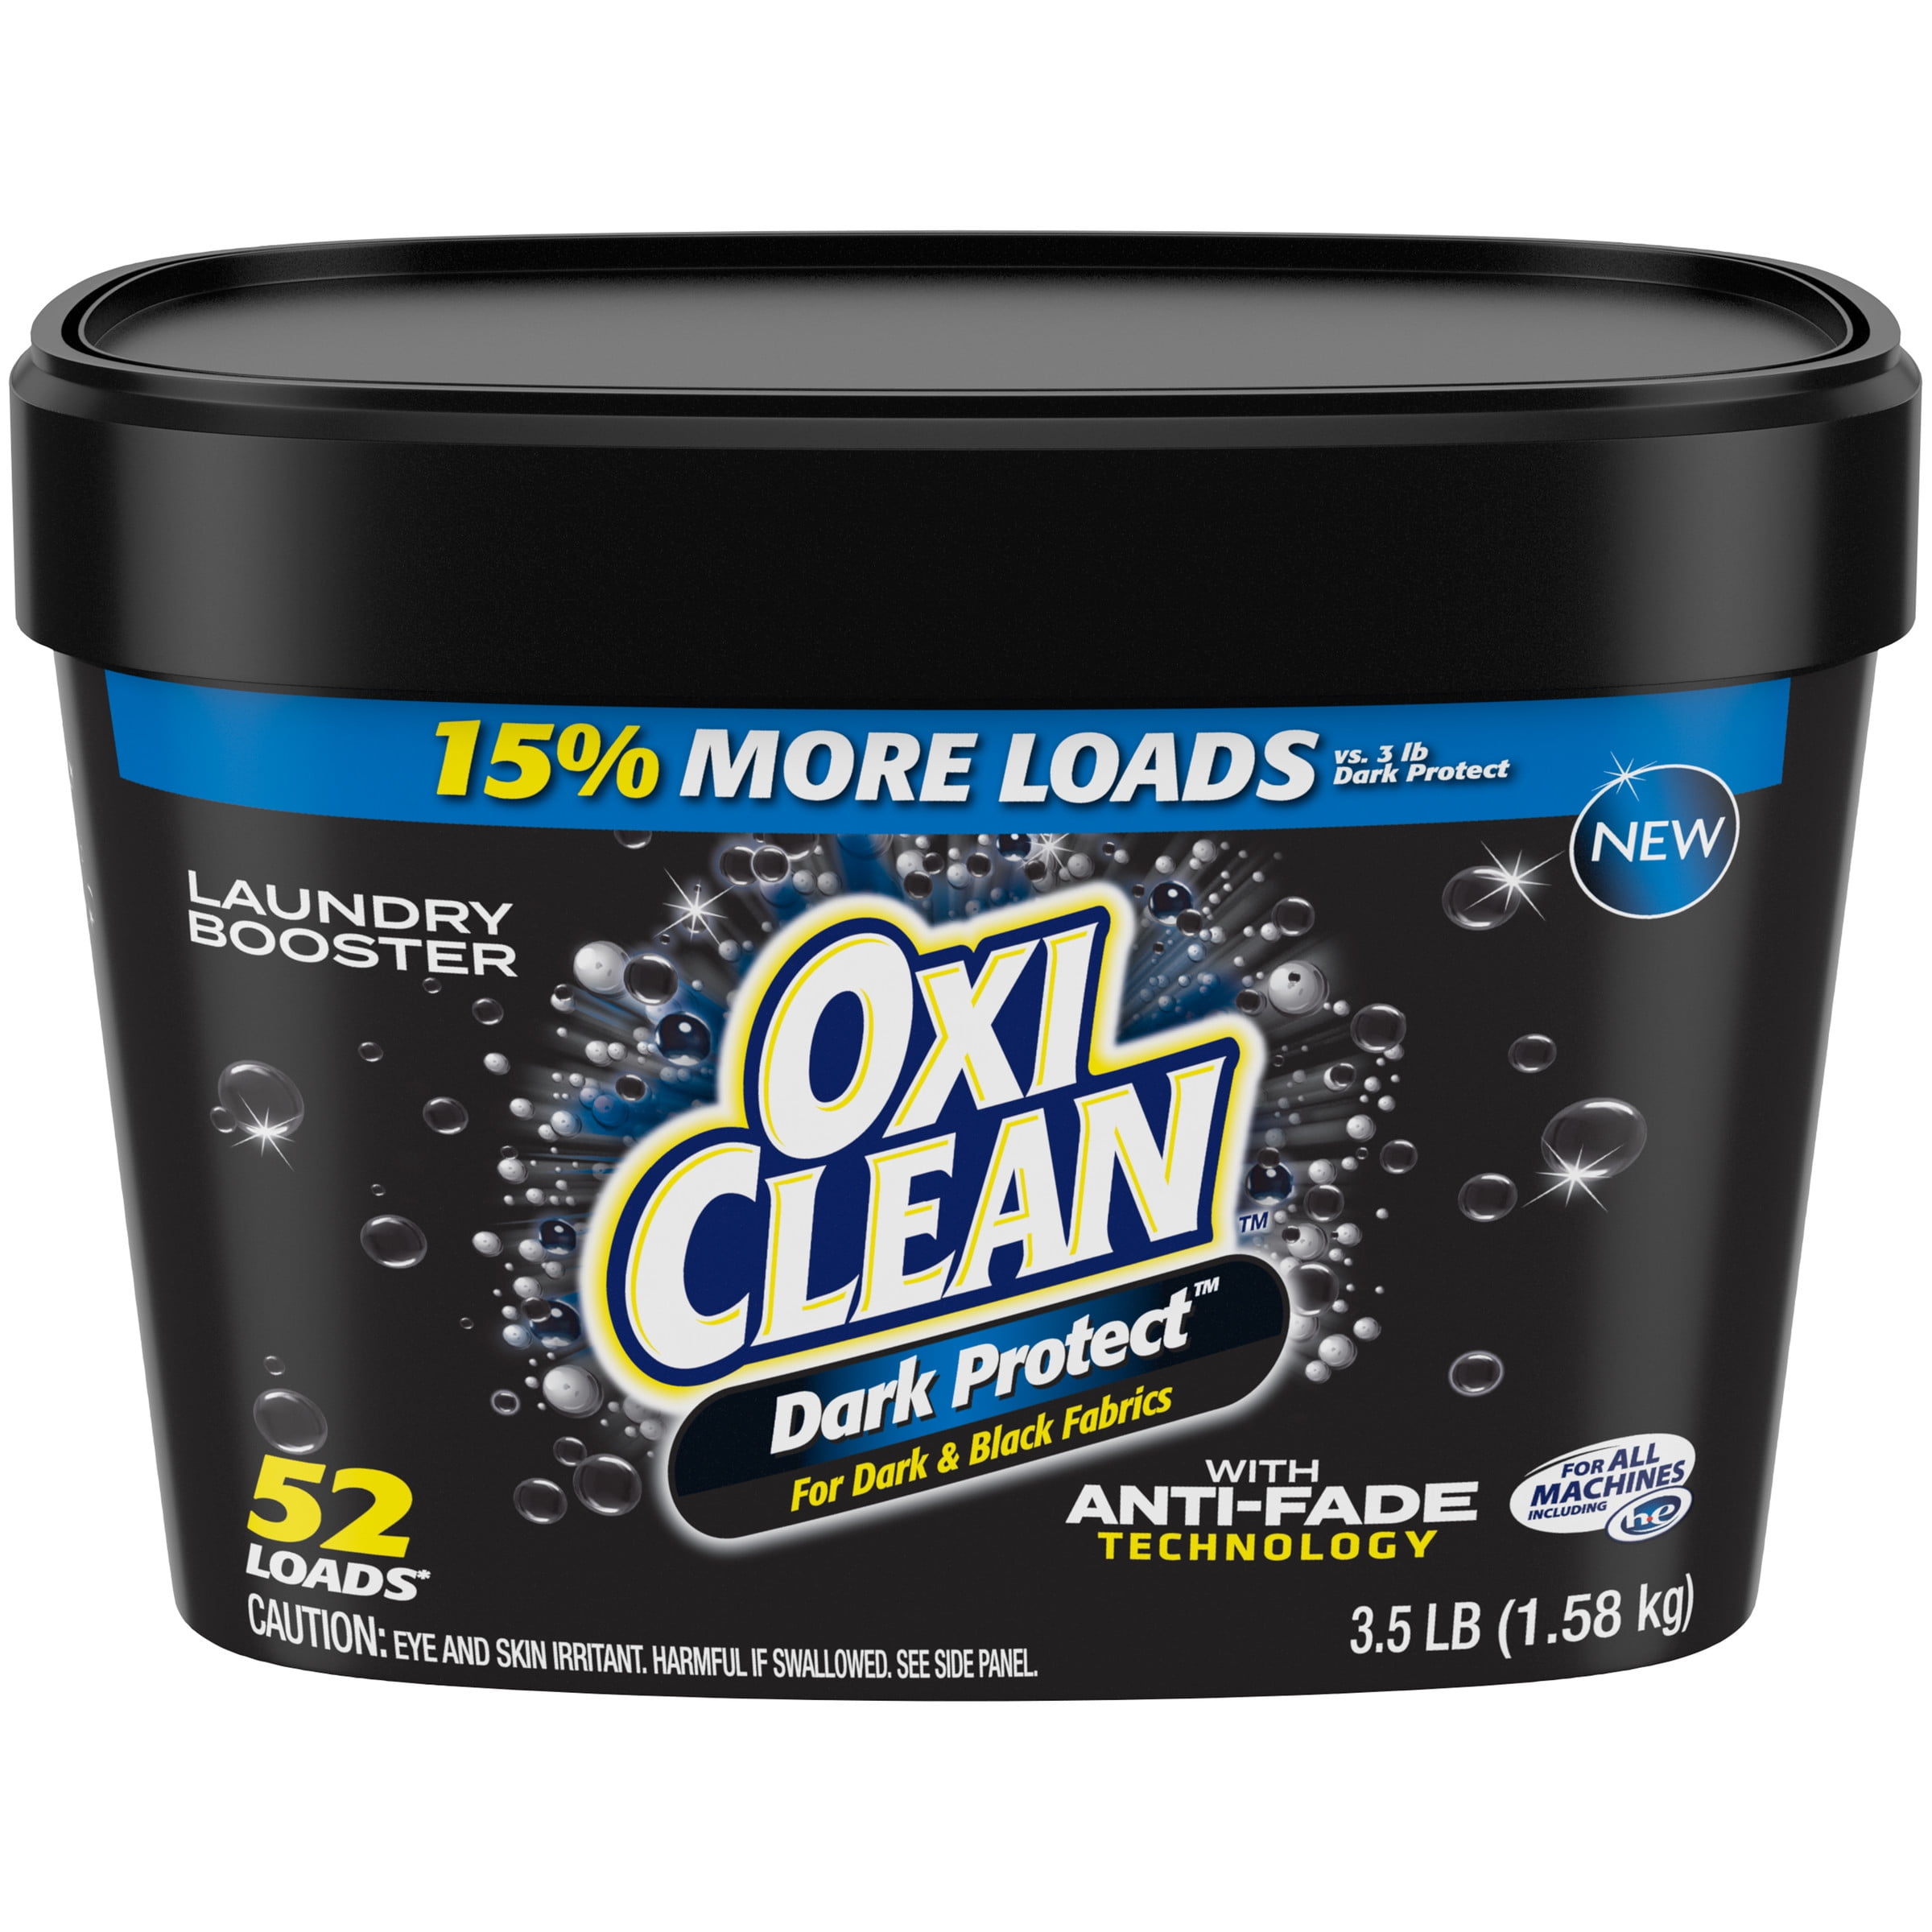 OxiClean™ Dark Protect™ Laundry Booster with Anti-Fade Technology 3 lb.  Container, Laundry Detergent